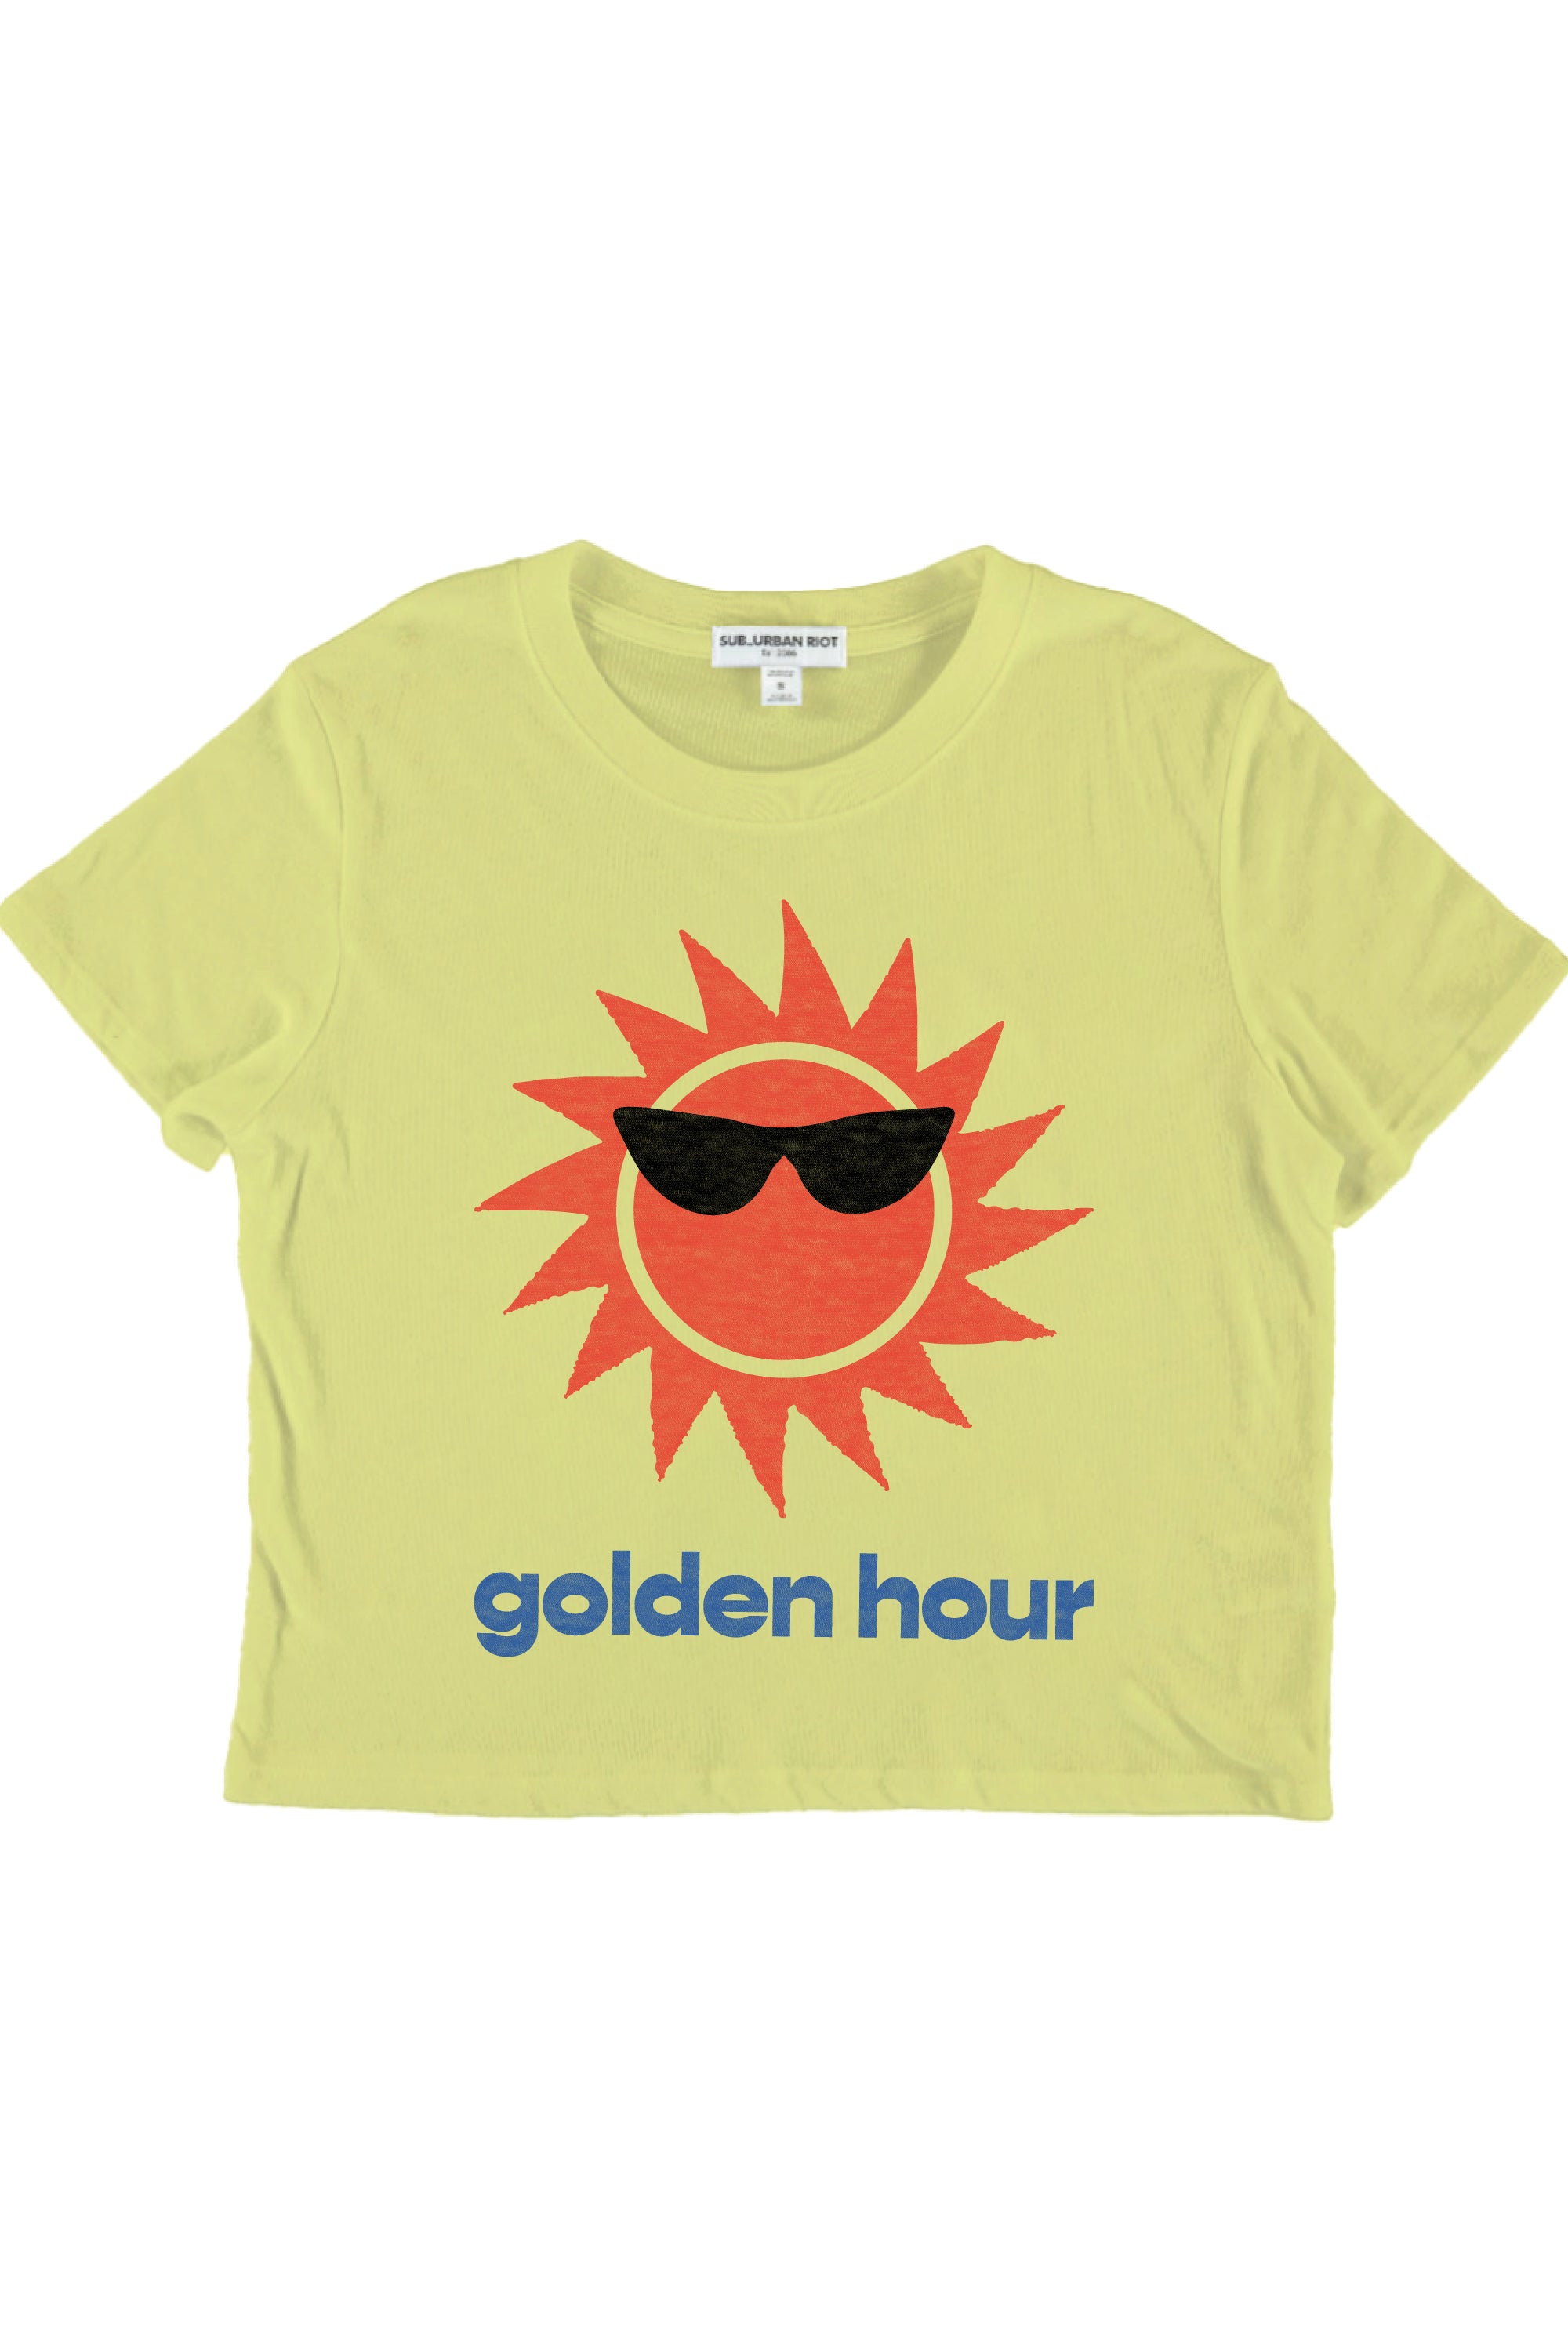 GOLDEN HOUR YOUTH SIZE CROP TEE